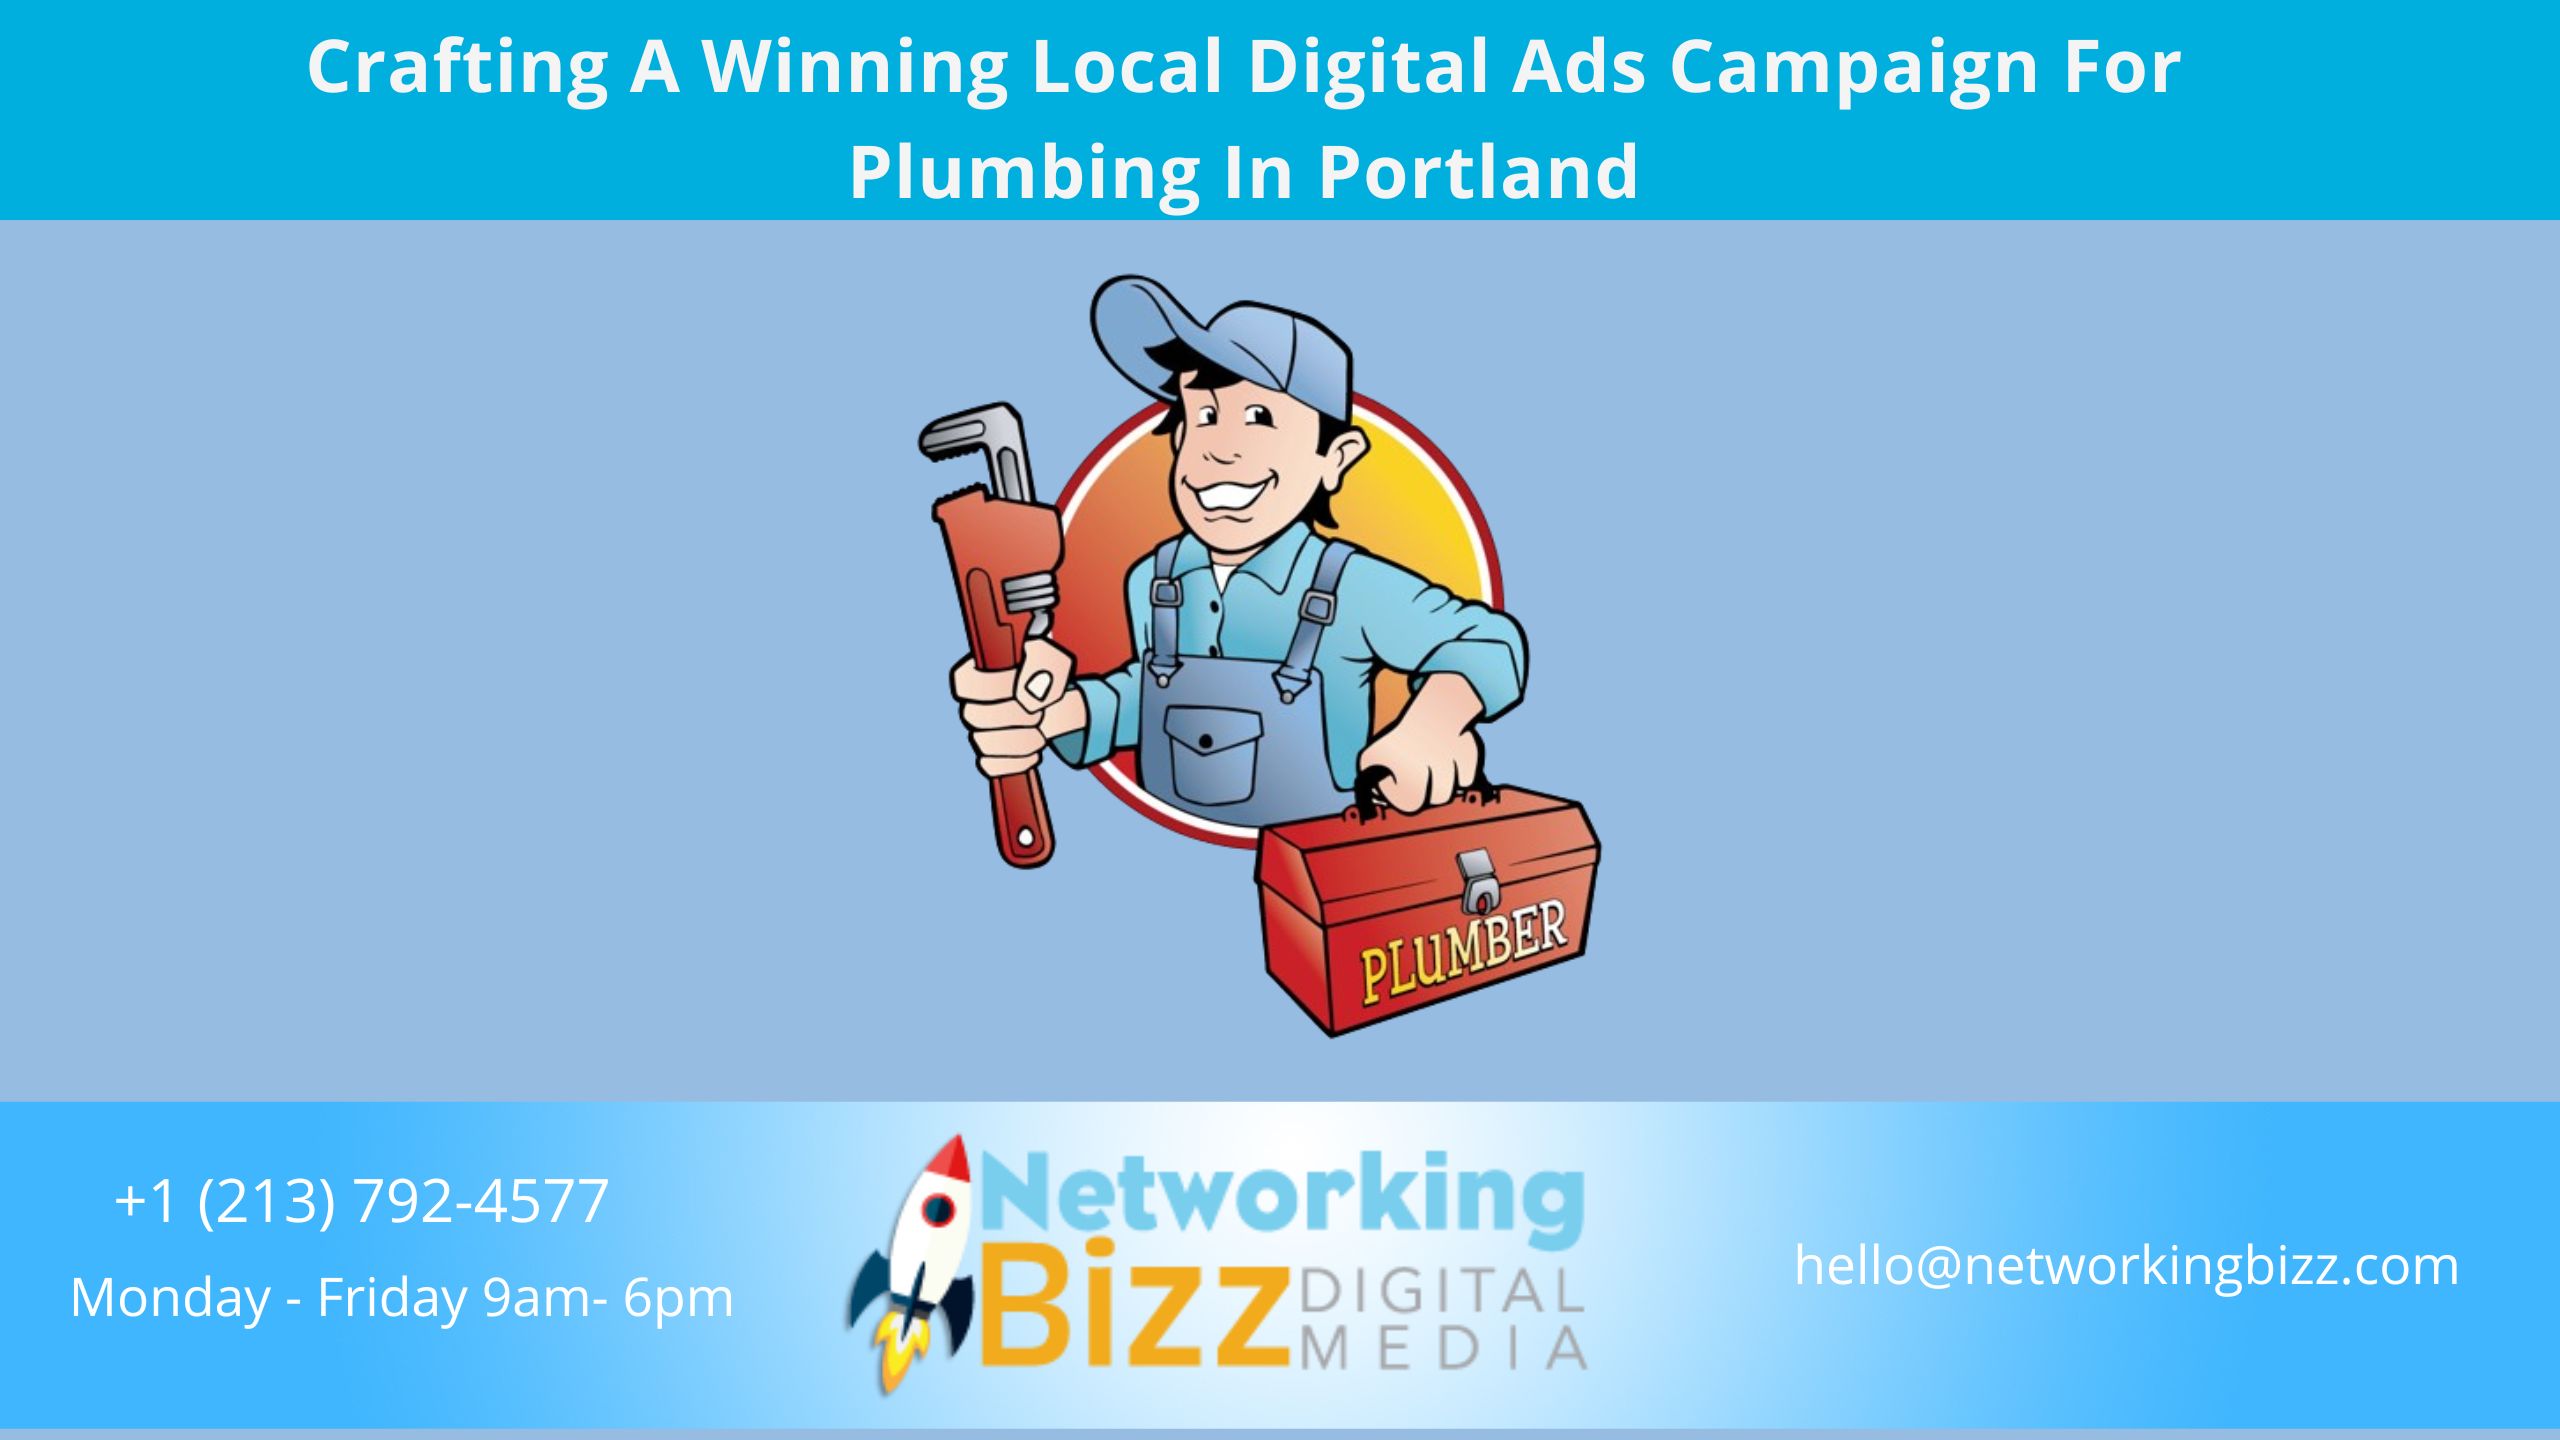 Crafting A Winning Local Digital Ads Campaign For Plumbing In Portland